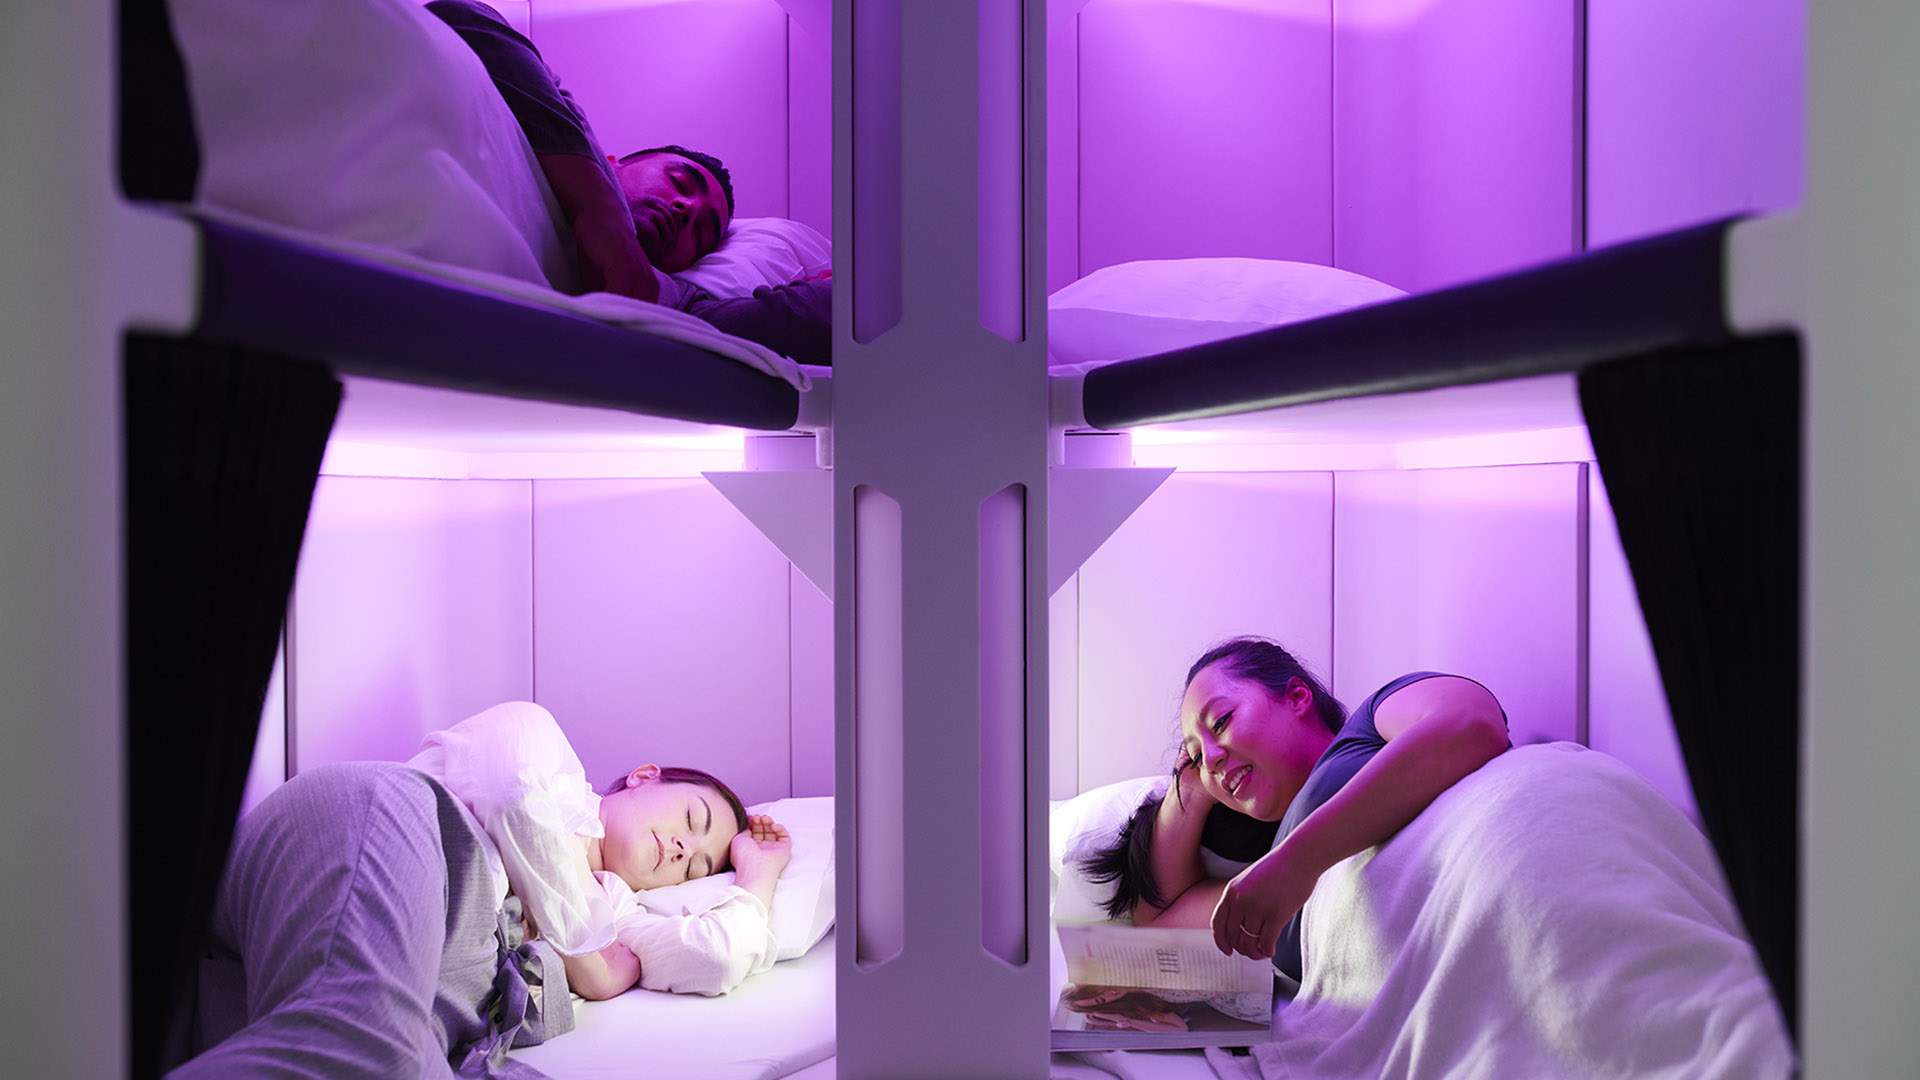 You'll Be Able to Slumber in the Sky in Air New Zealand's Lie-Flat Economy Sleeping Pods From 2024 